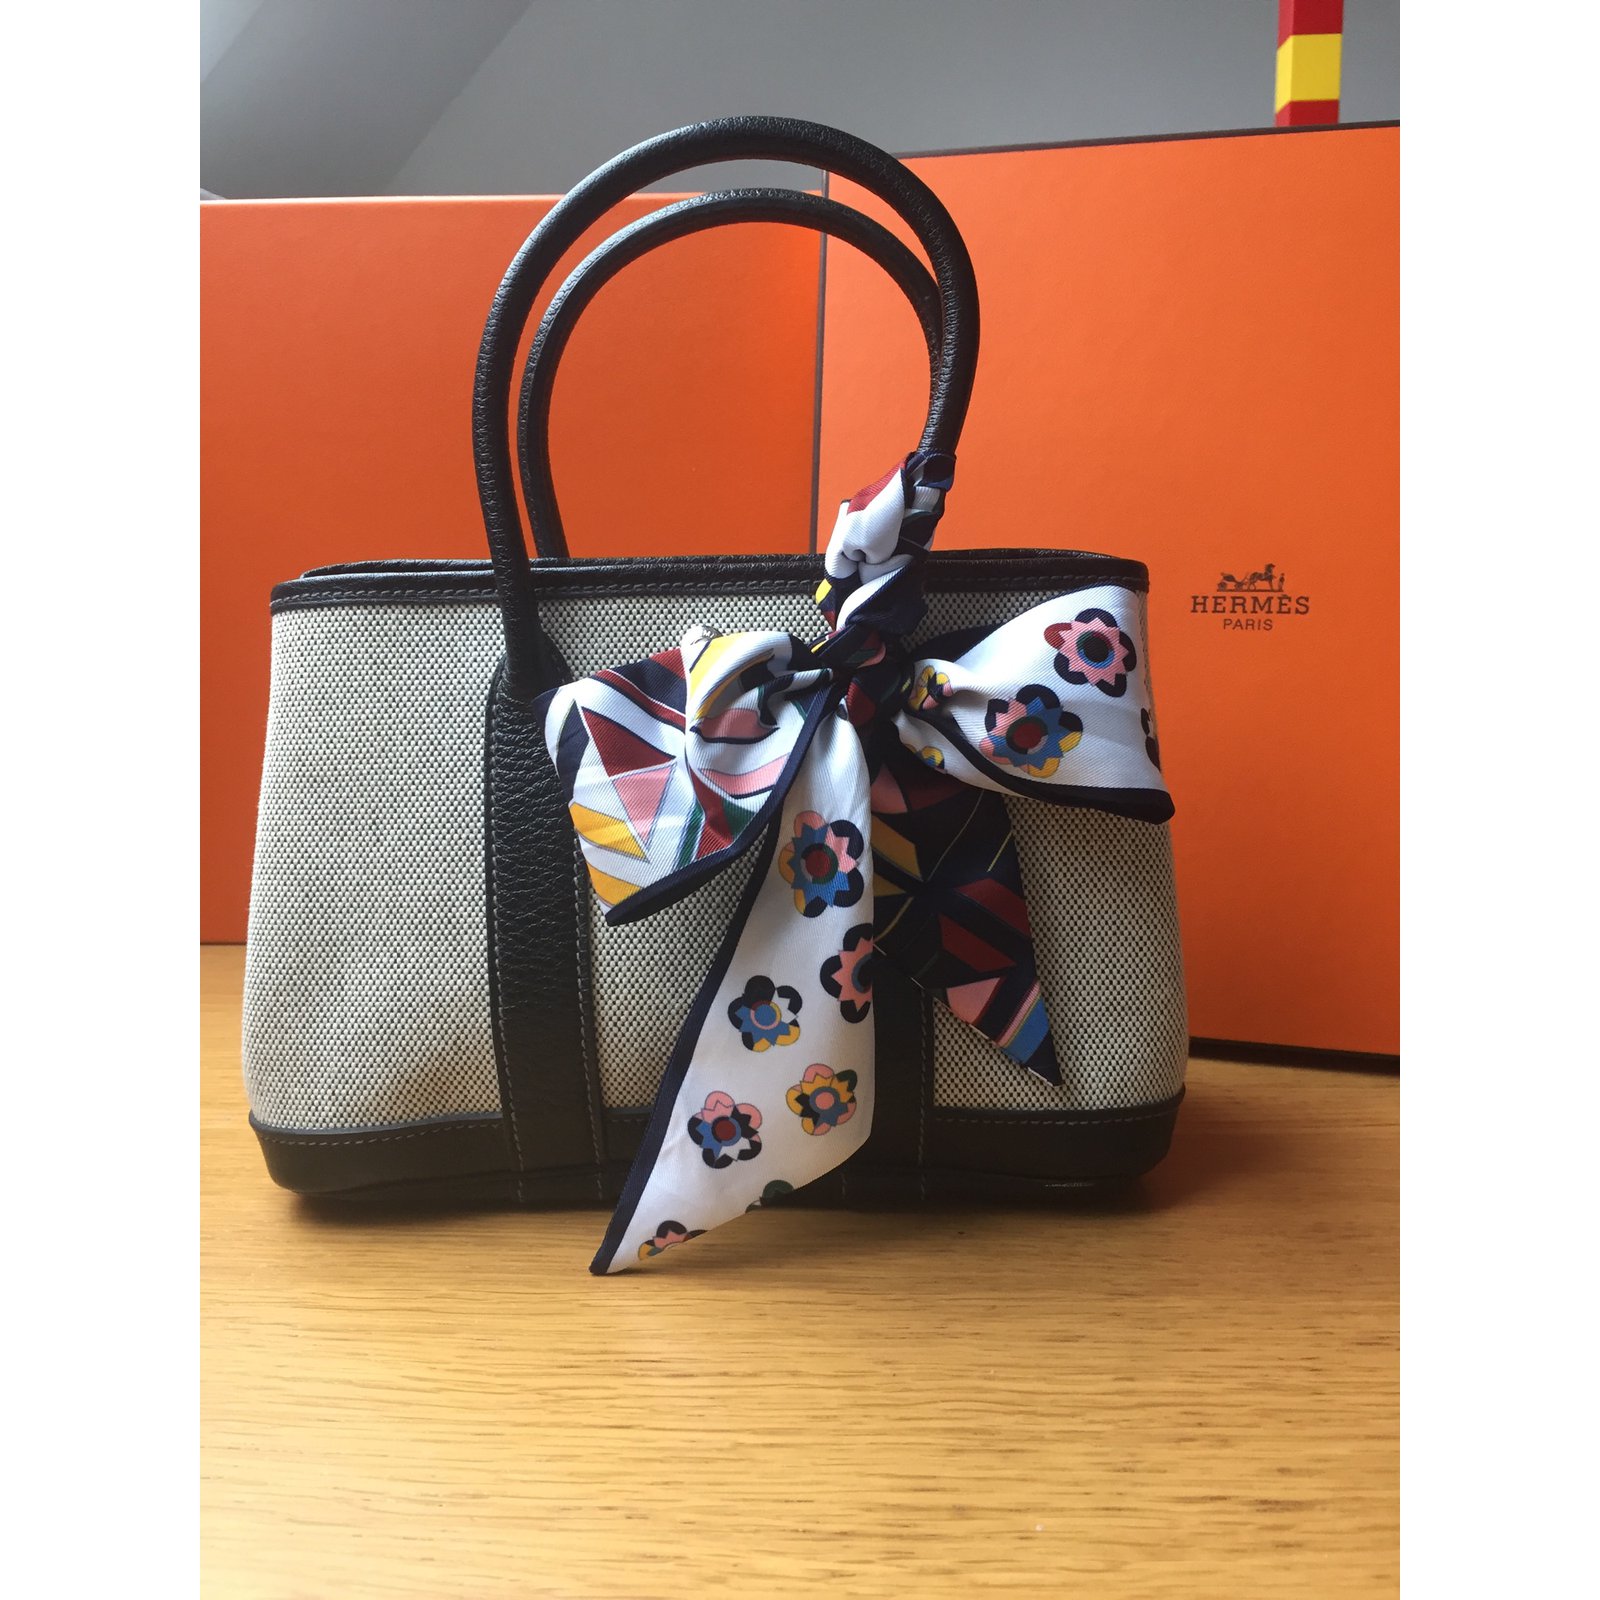 Garden Party Hermes bag with mini twilly